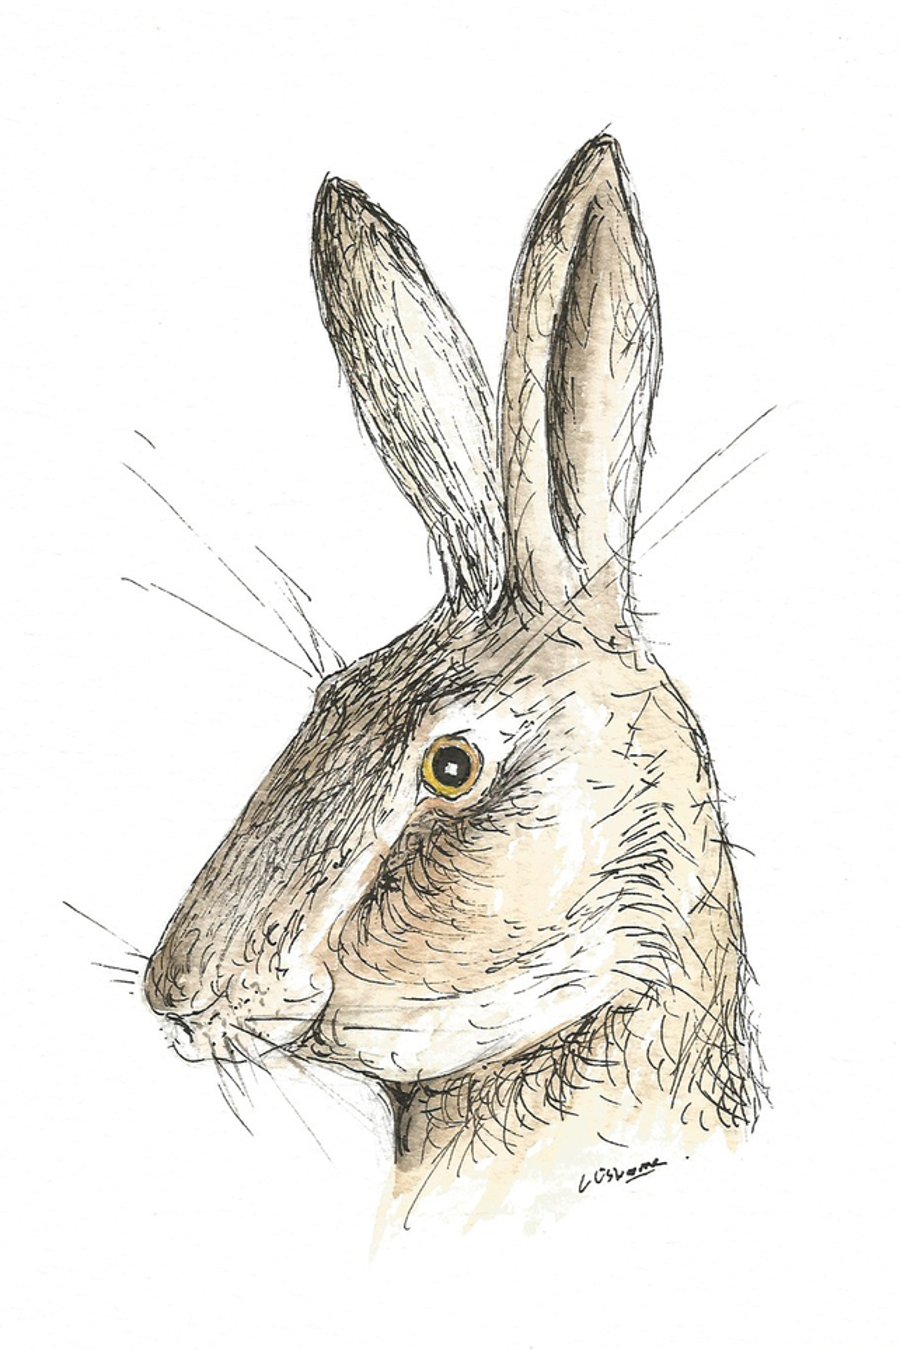 Surprised hare - print from original drawing